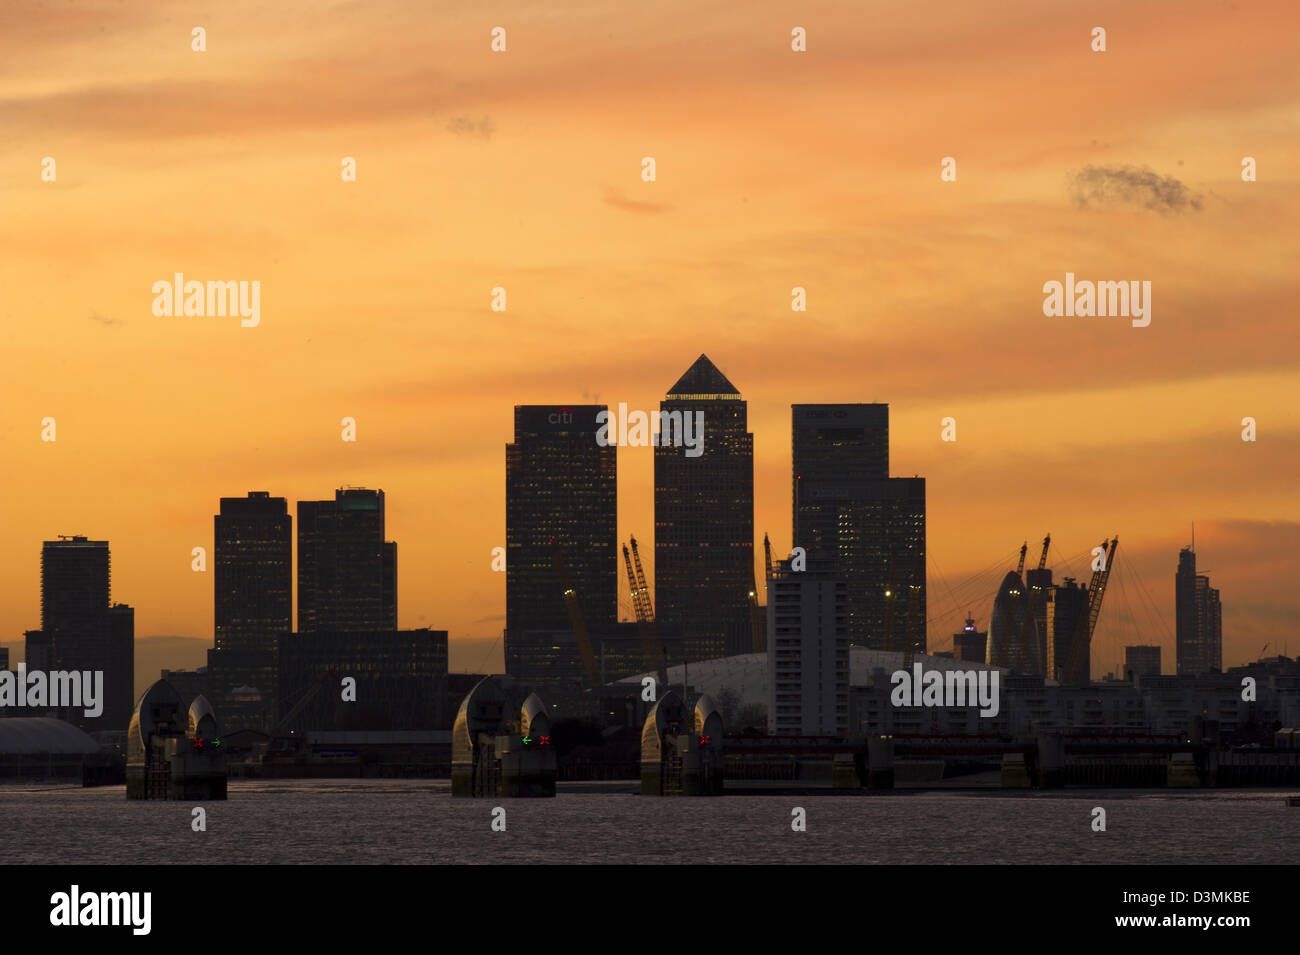 The outline of buildings at Canary Wharf in London are seen in ...